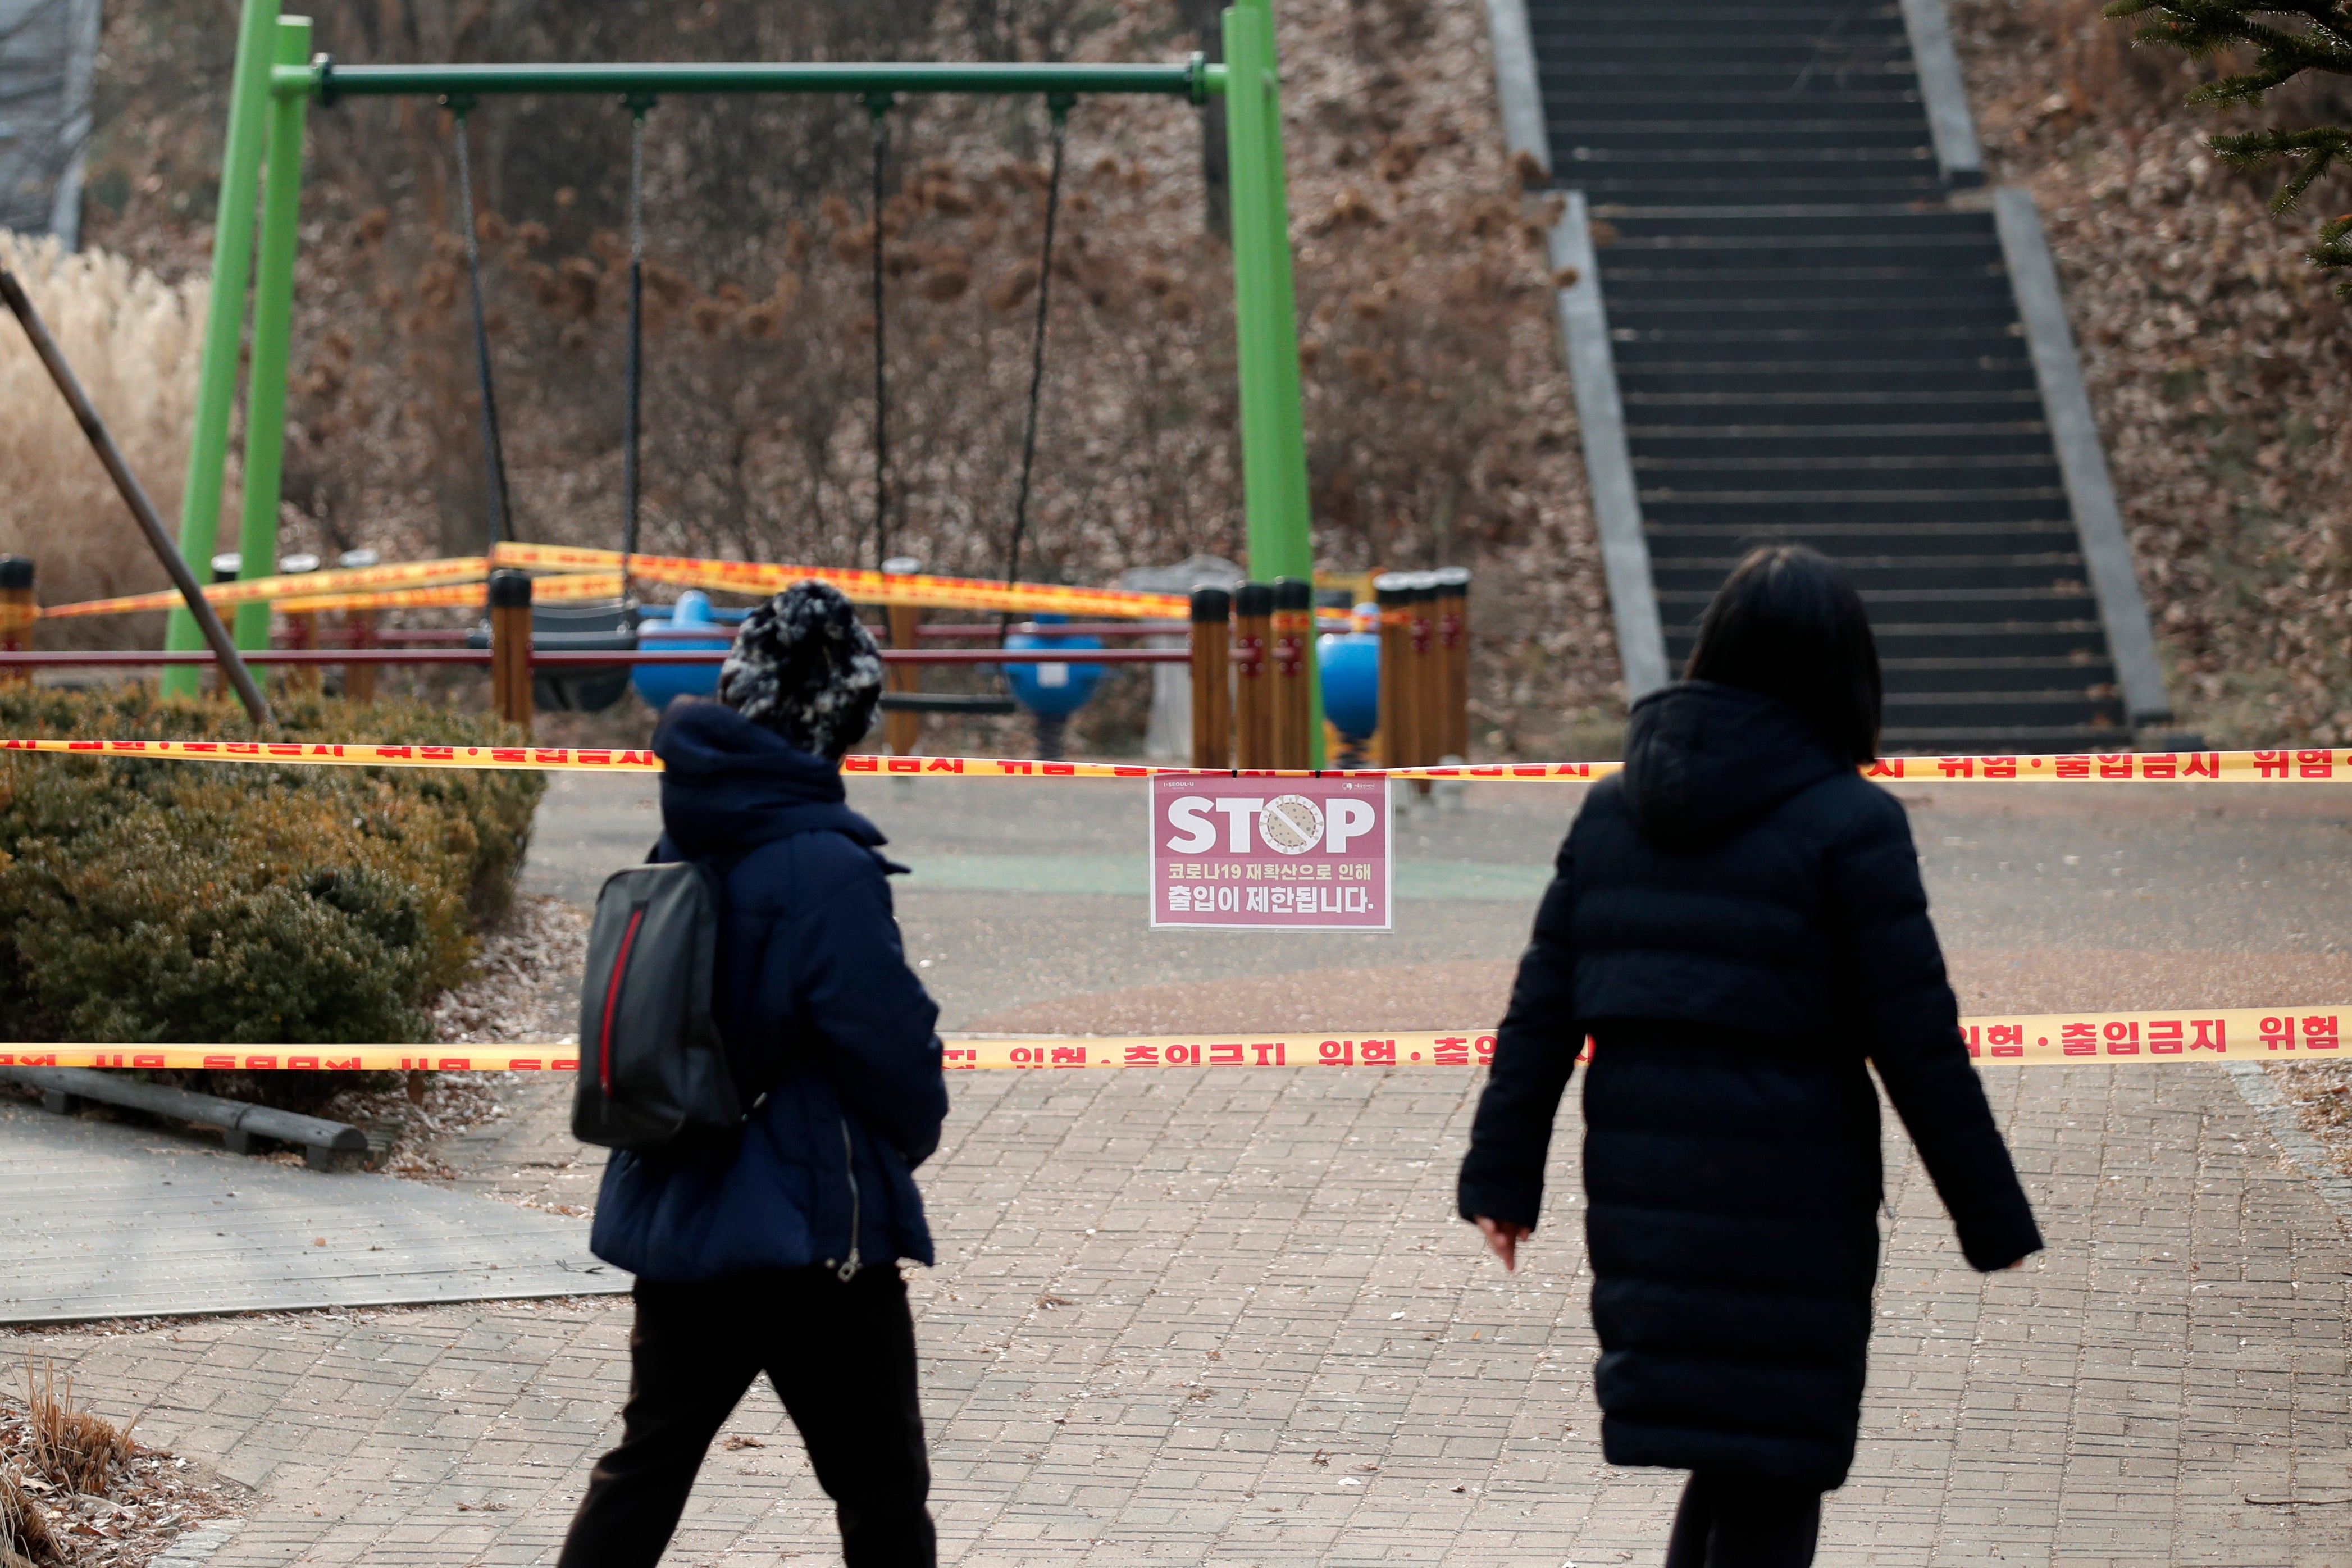 Visitors look at a playground, which is taped off for the social distancing measures, to control the spread of coronavirus at a park in Seoul, South Korea.